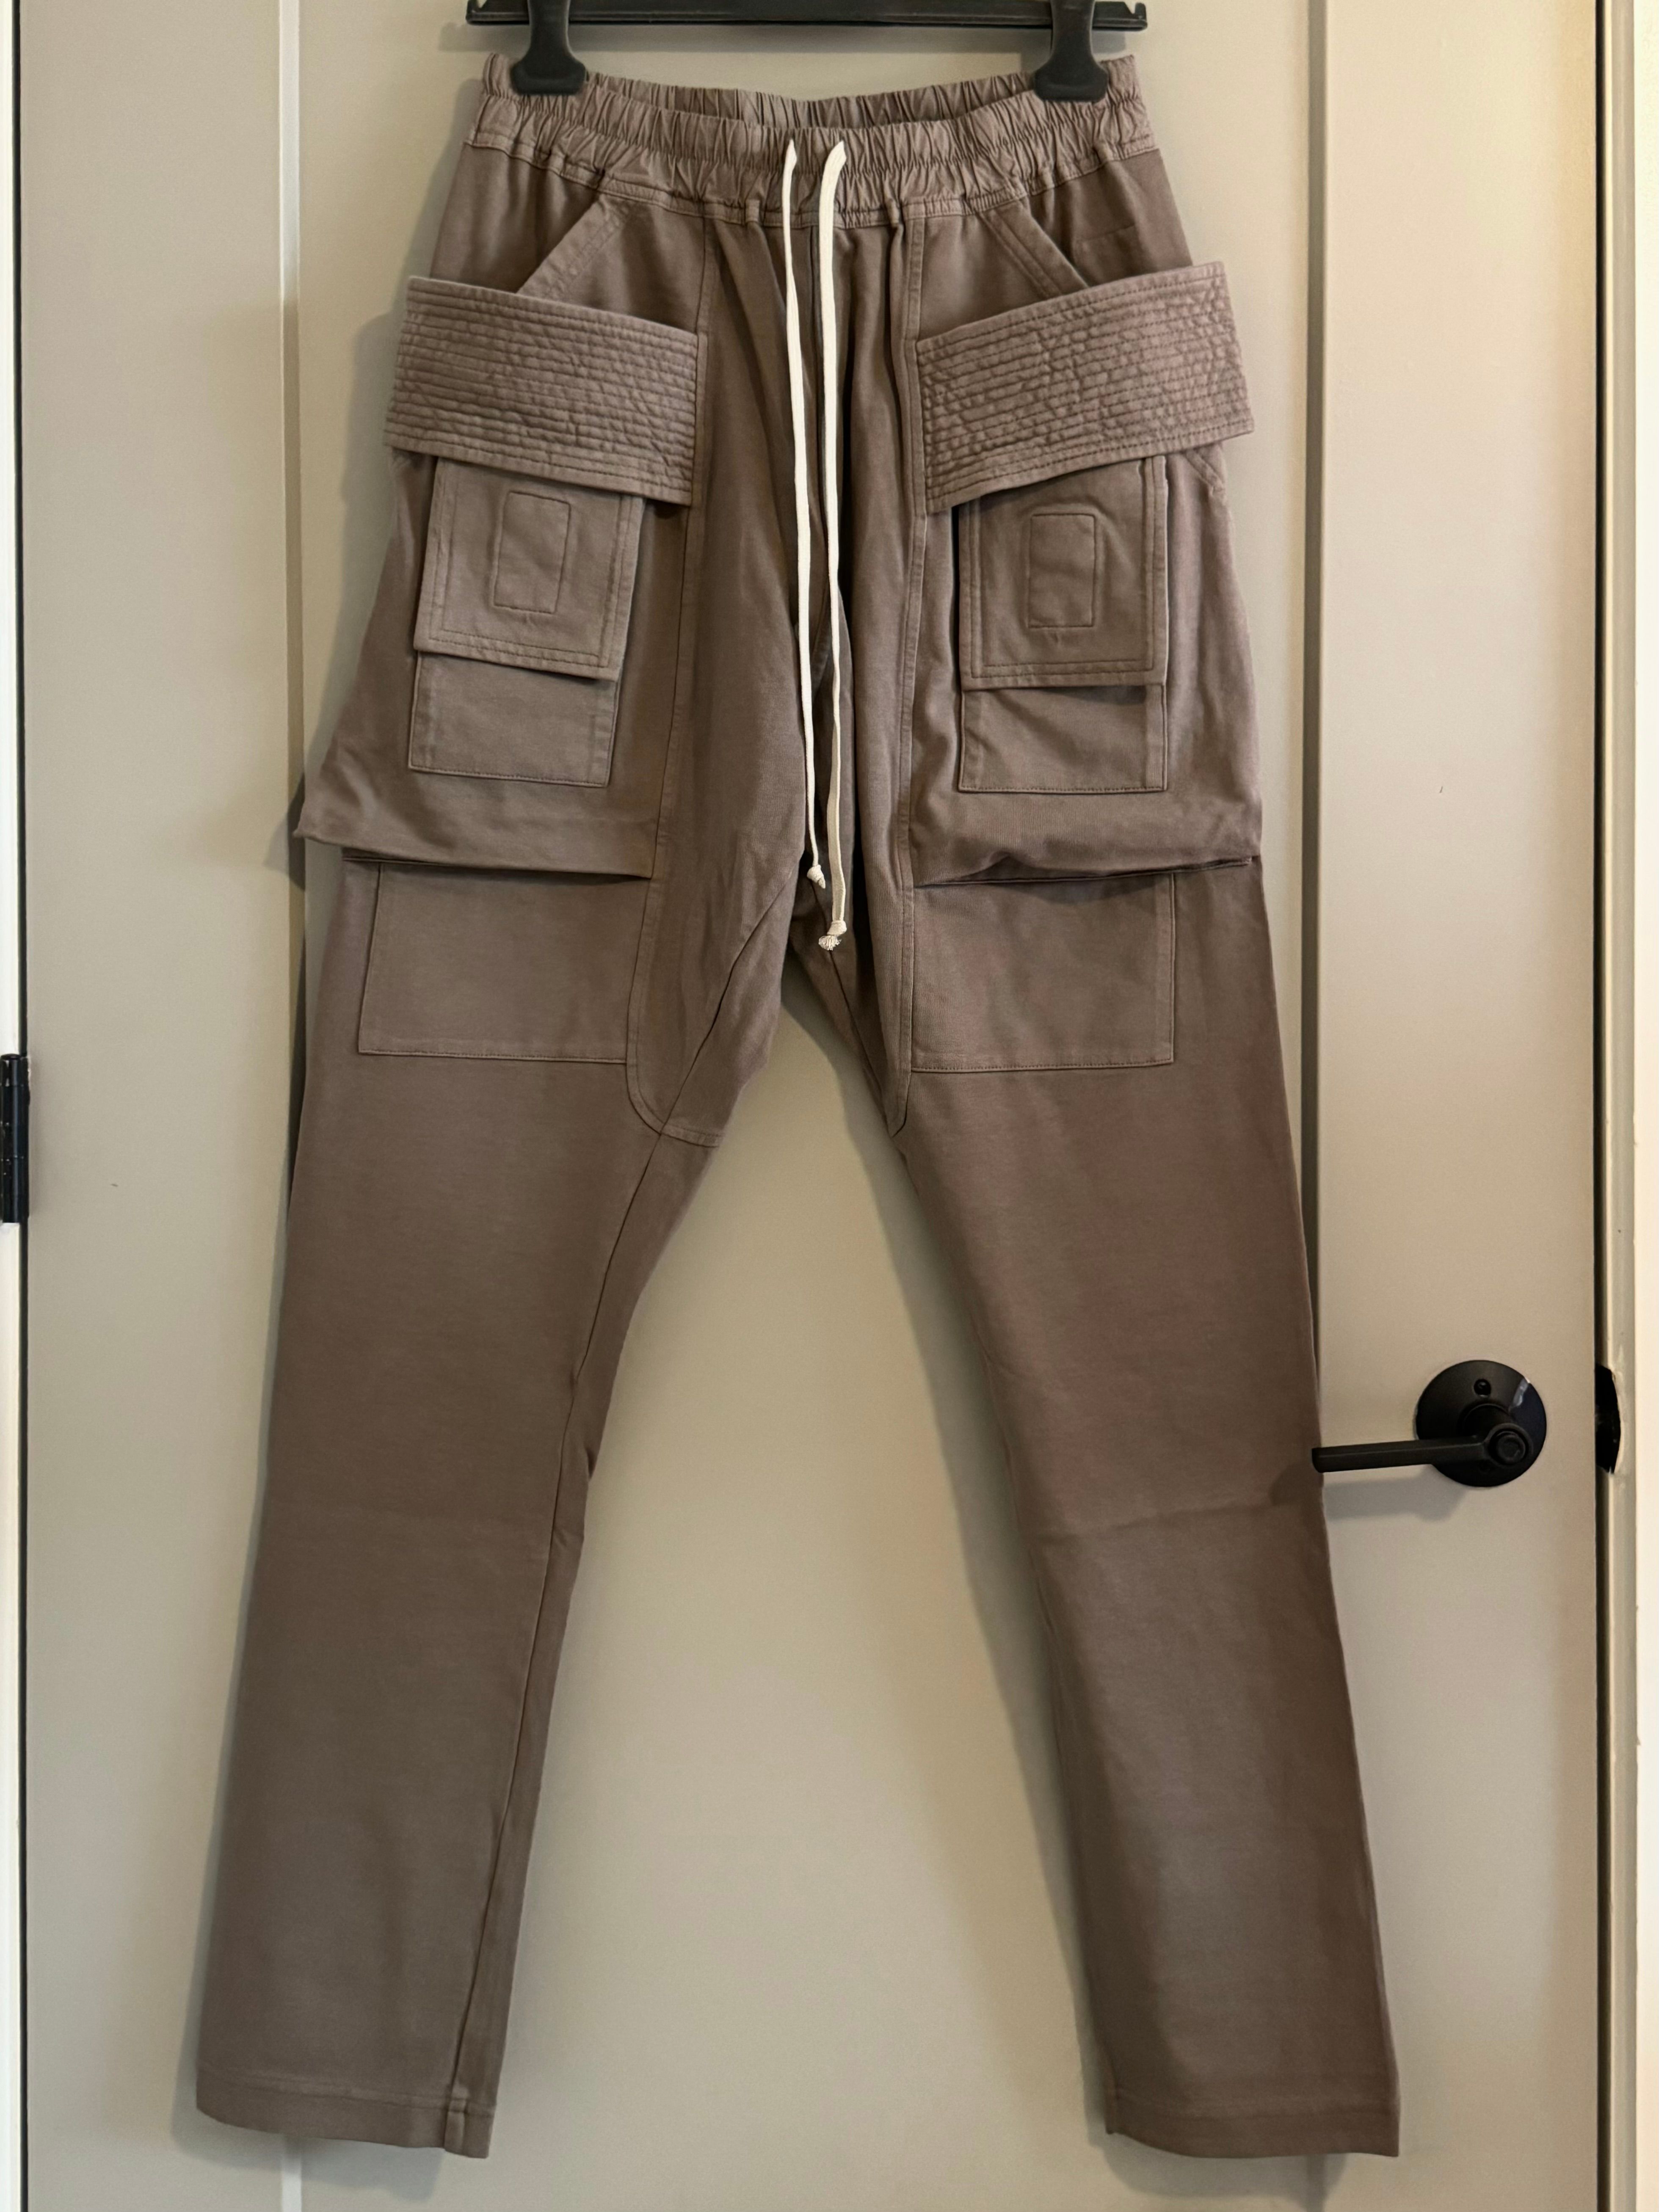 Pre-owned Rick Owens X Rick Owens Drkshdw Creatch Cargo Drawstring Pants Dust Brown Size S